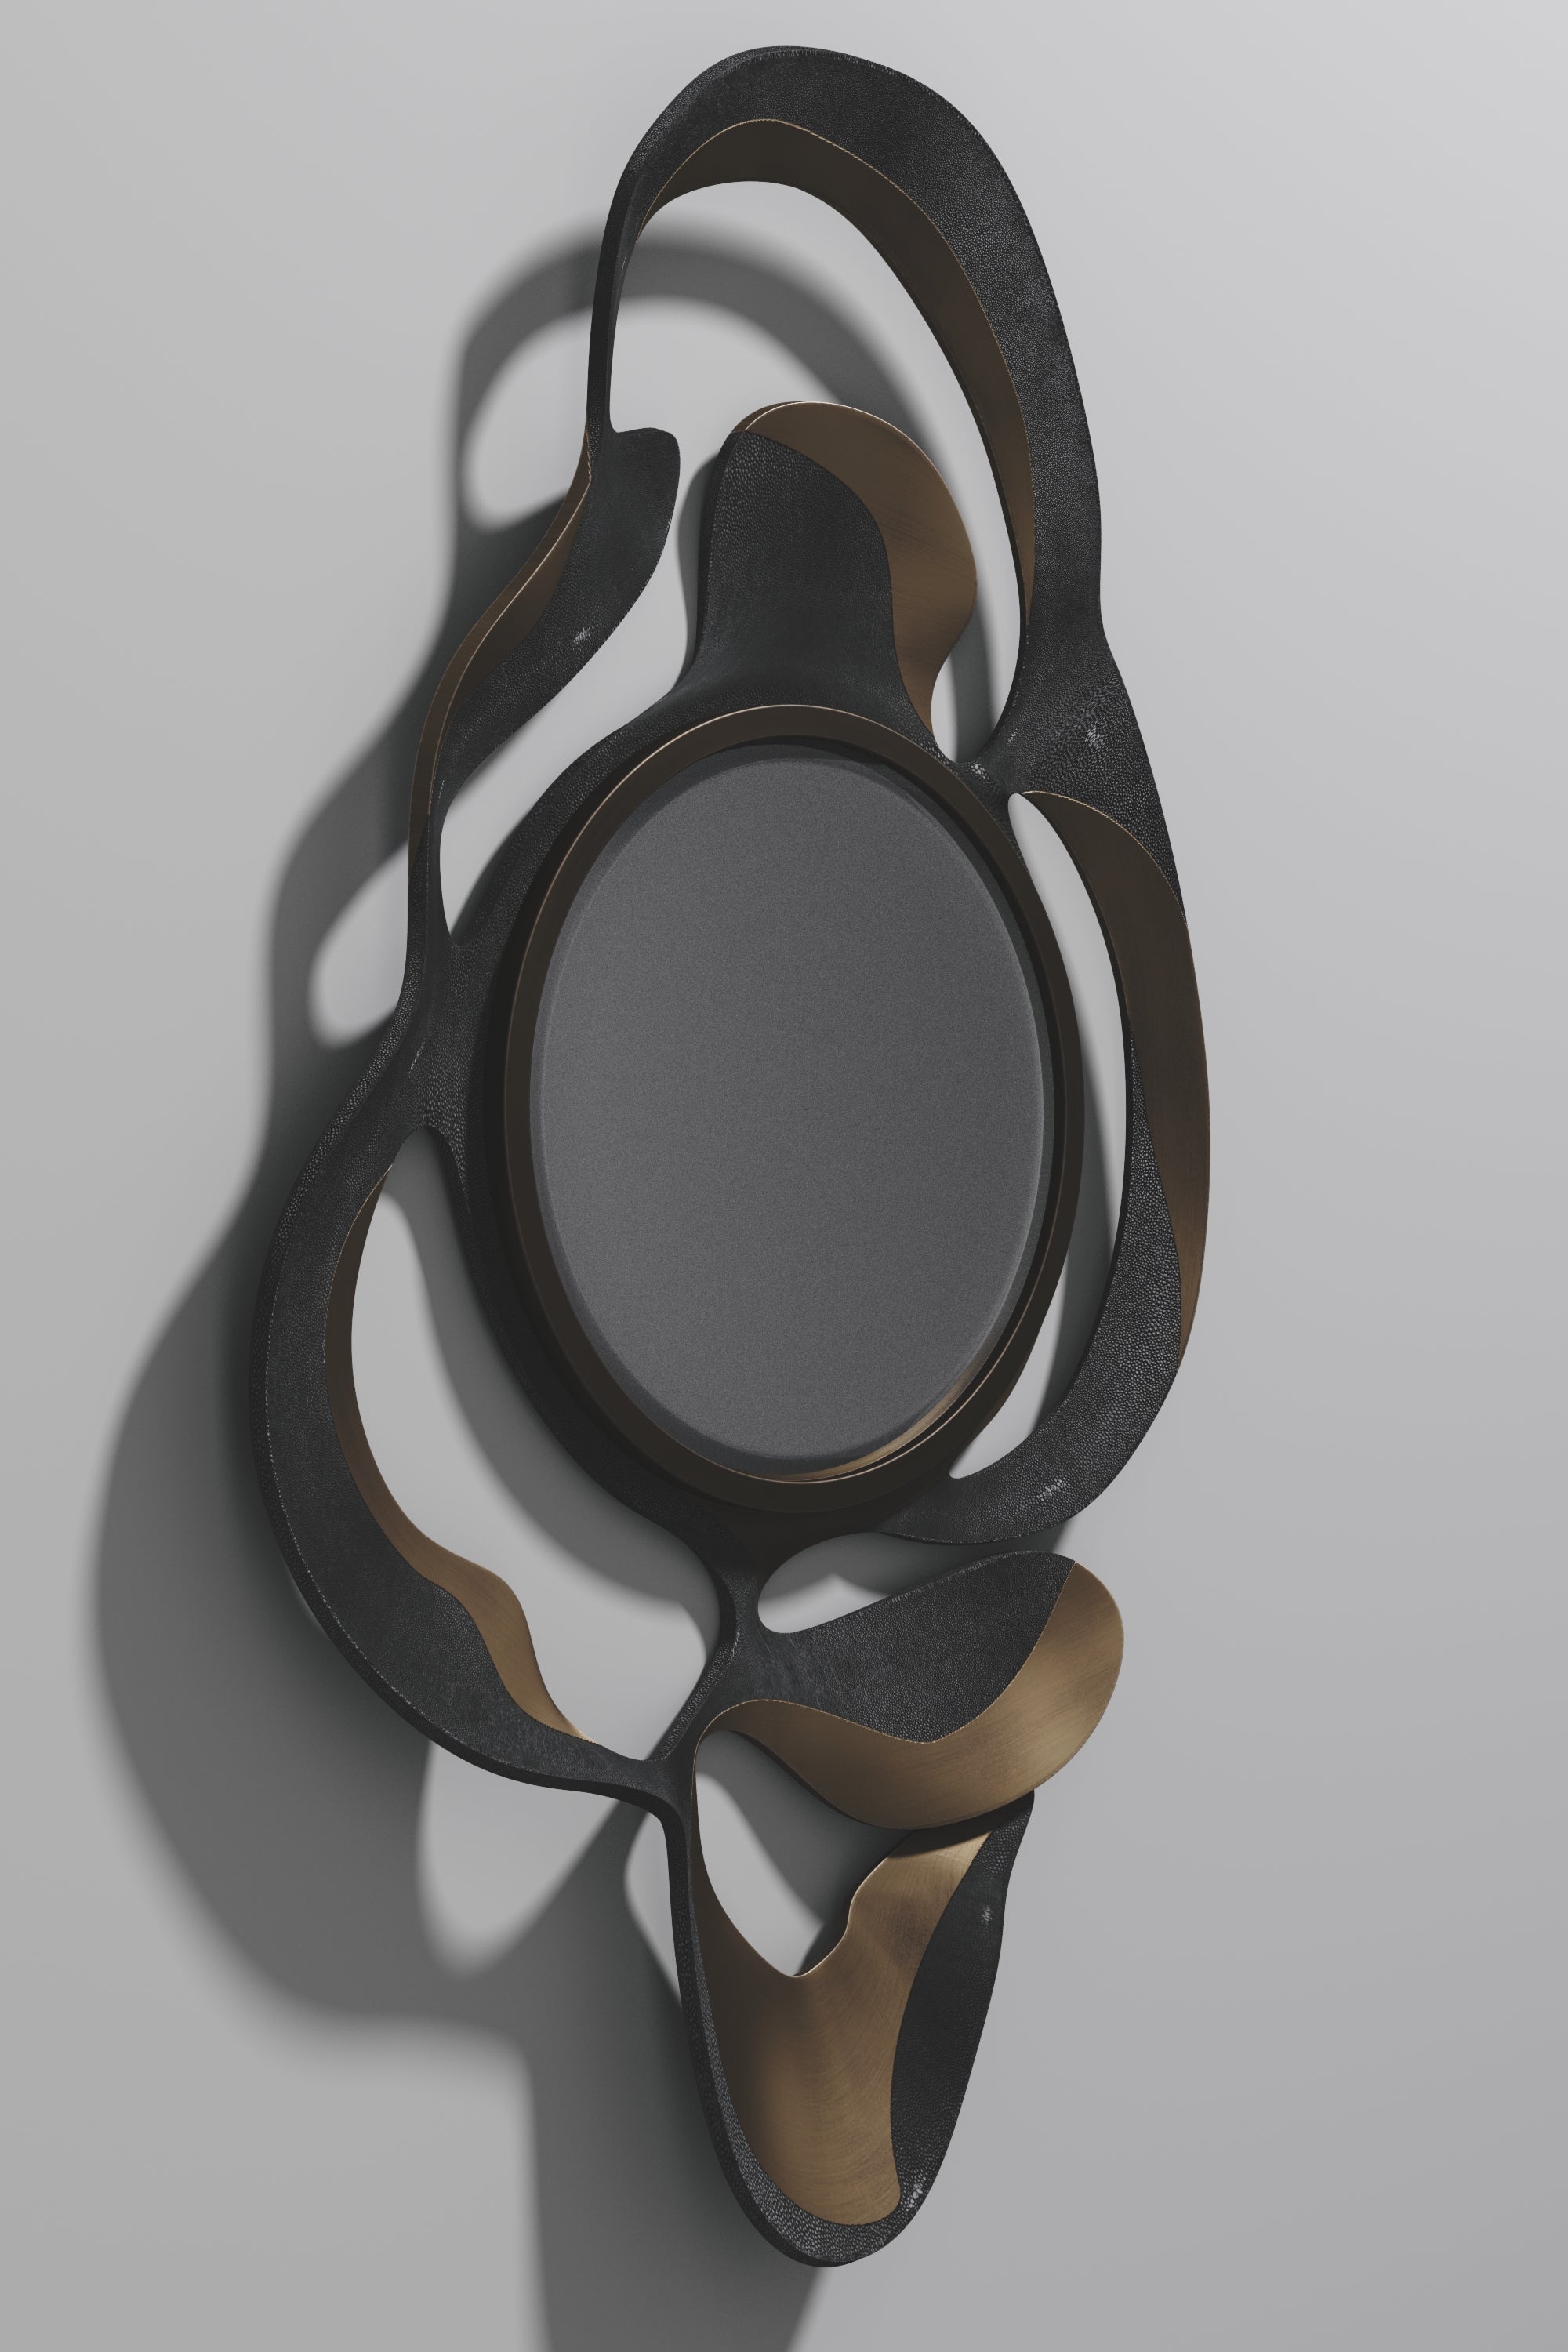 The Leaf Mirror by Kifu Paris is a dramatic and organic piece. The coal black shagreen and bronze-patina bass inlay mixture creates a striking appearance as it emulates a whimsical interpretation of intertwining branches. This piece is designed by